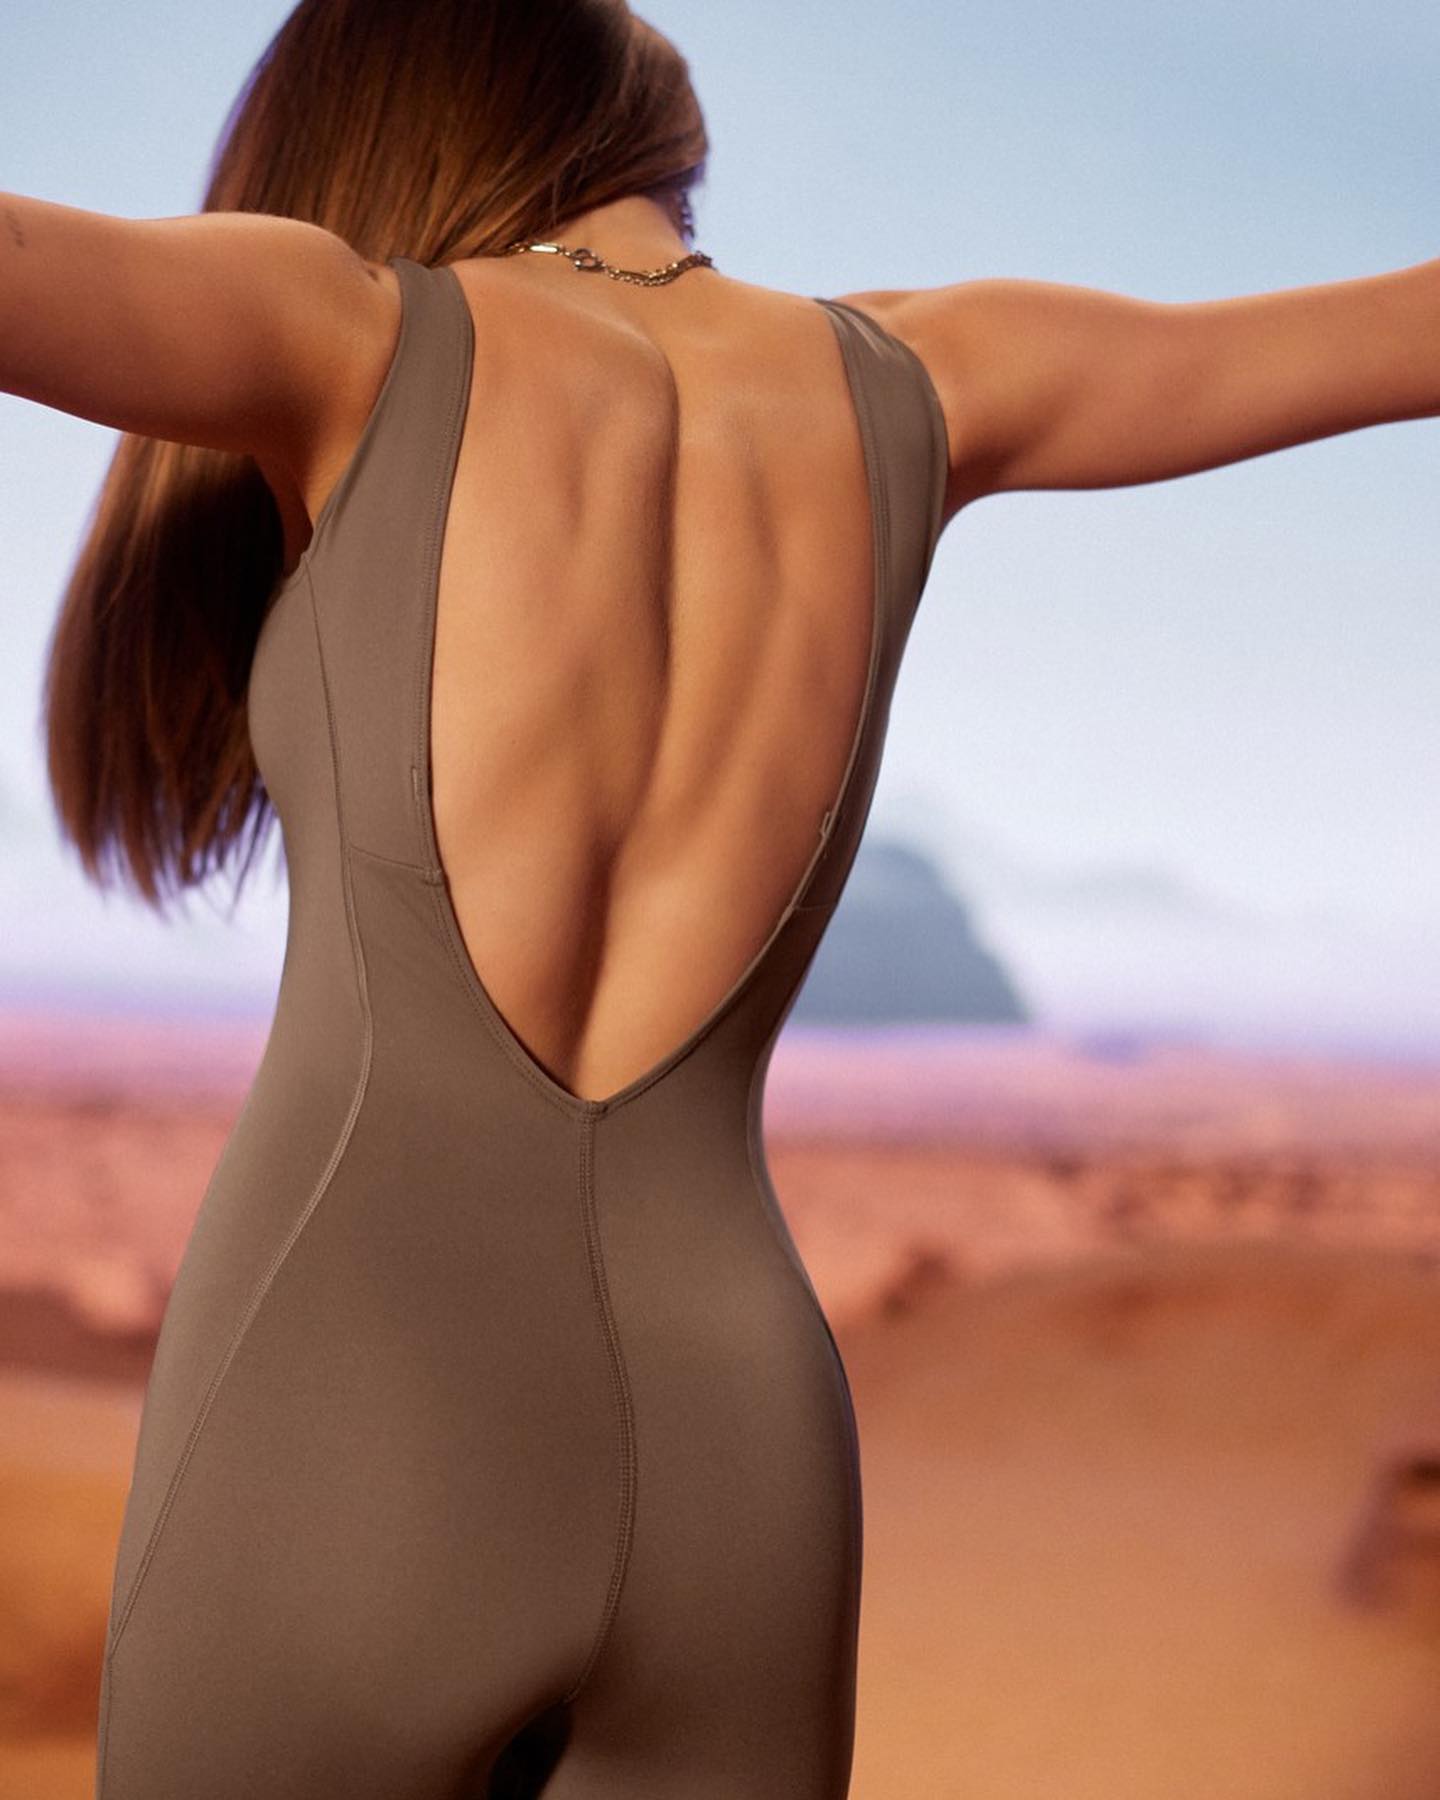 Maddie Ziegler Goes to The Desert With New Fabletics Line! - Photo 3